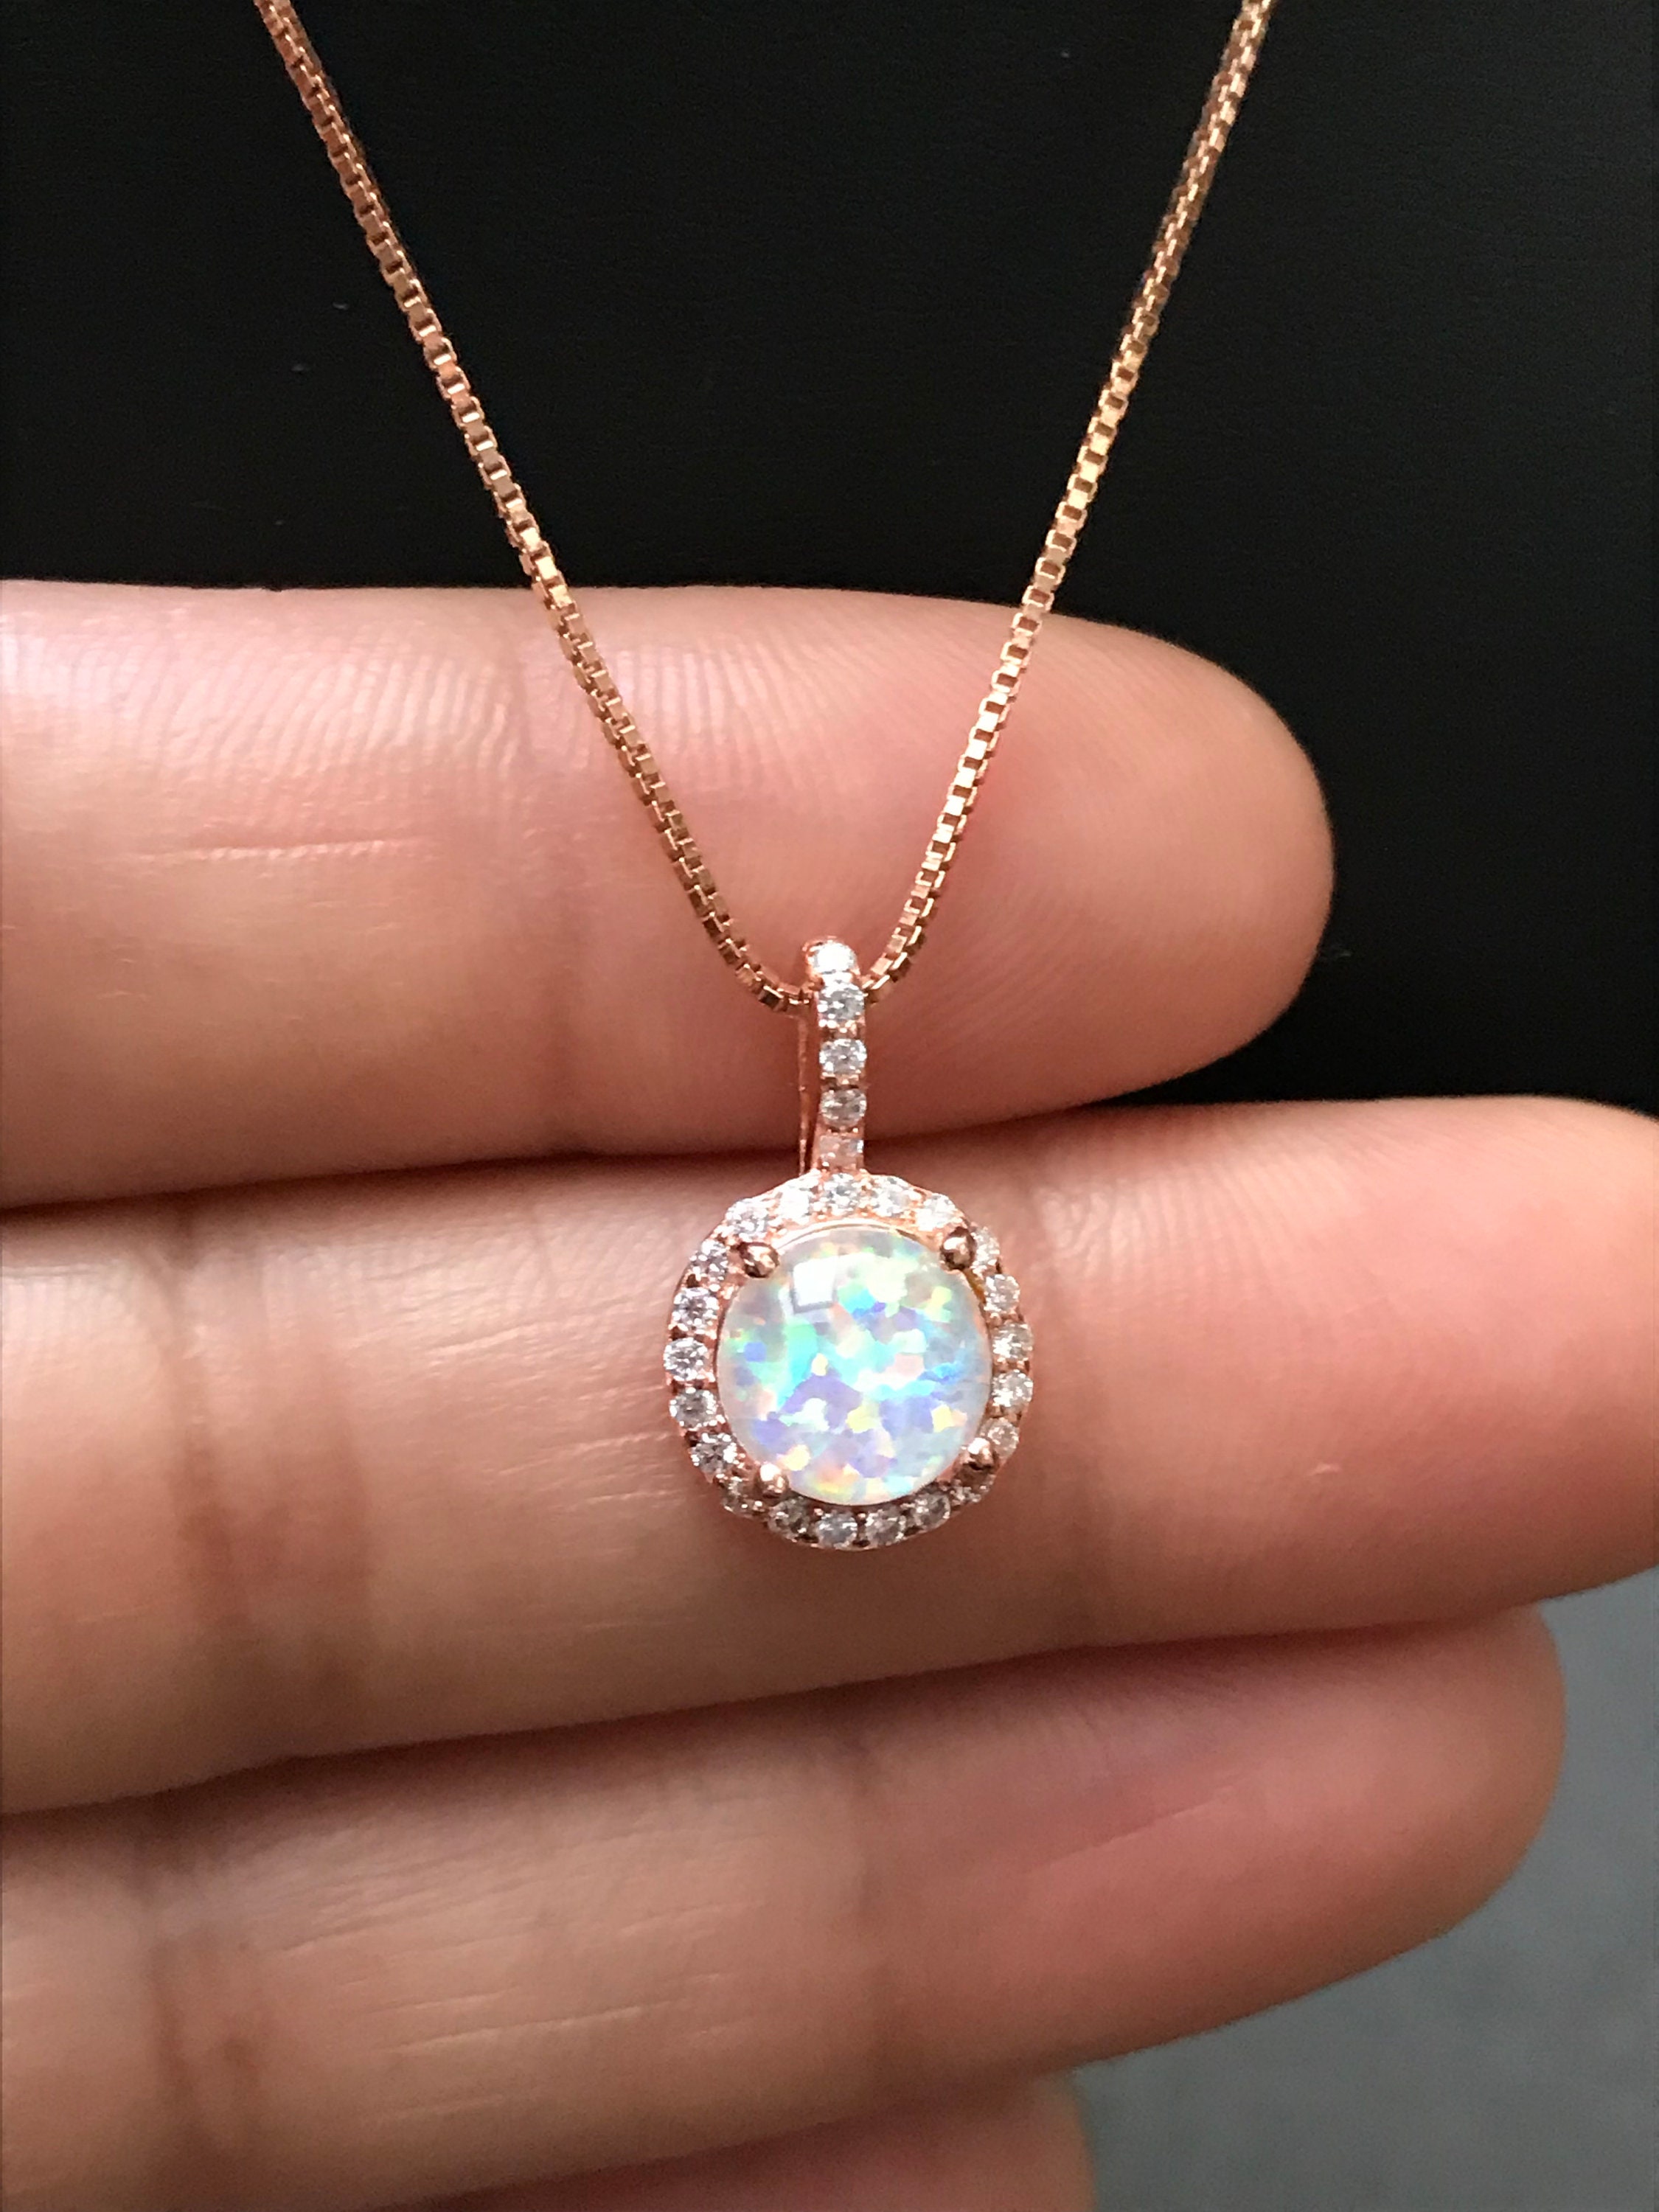 Details about   Round White Fire Opal Crystal Halo Necklace Women Jewelry 14K Rose Gold Plated 